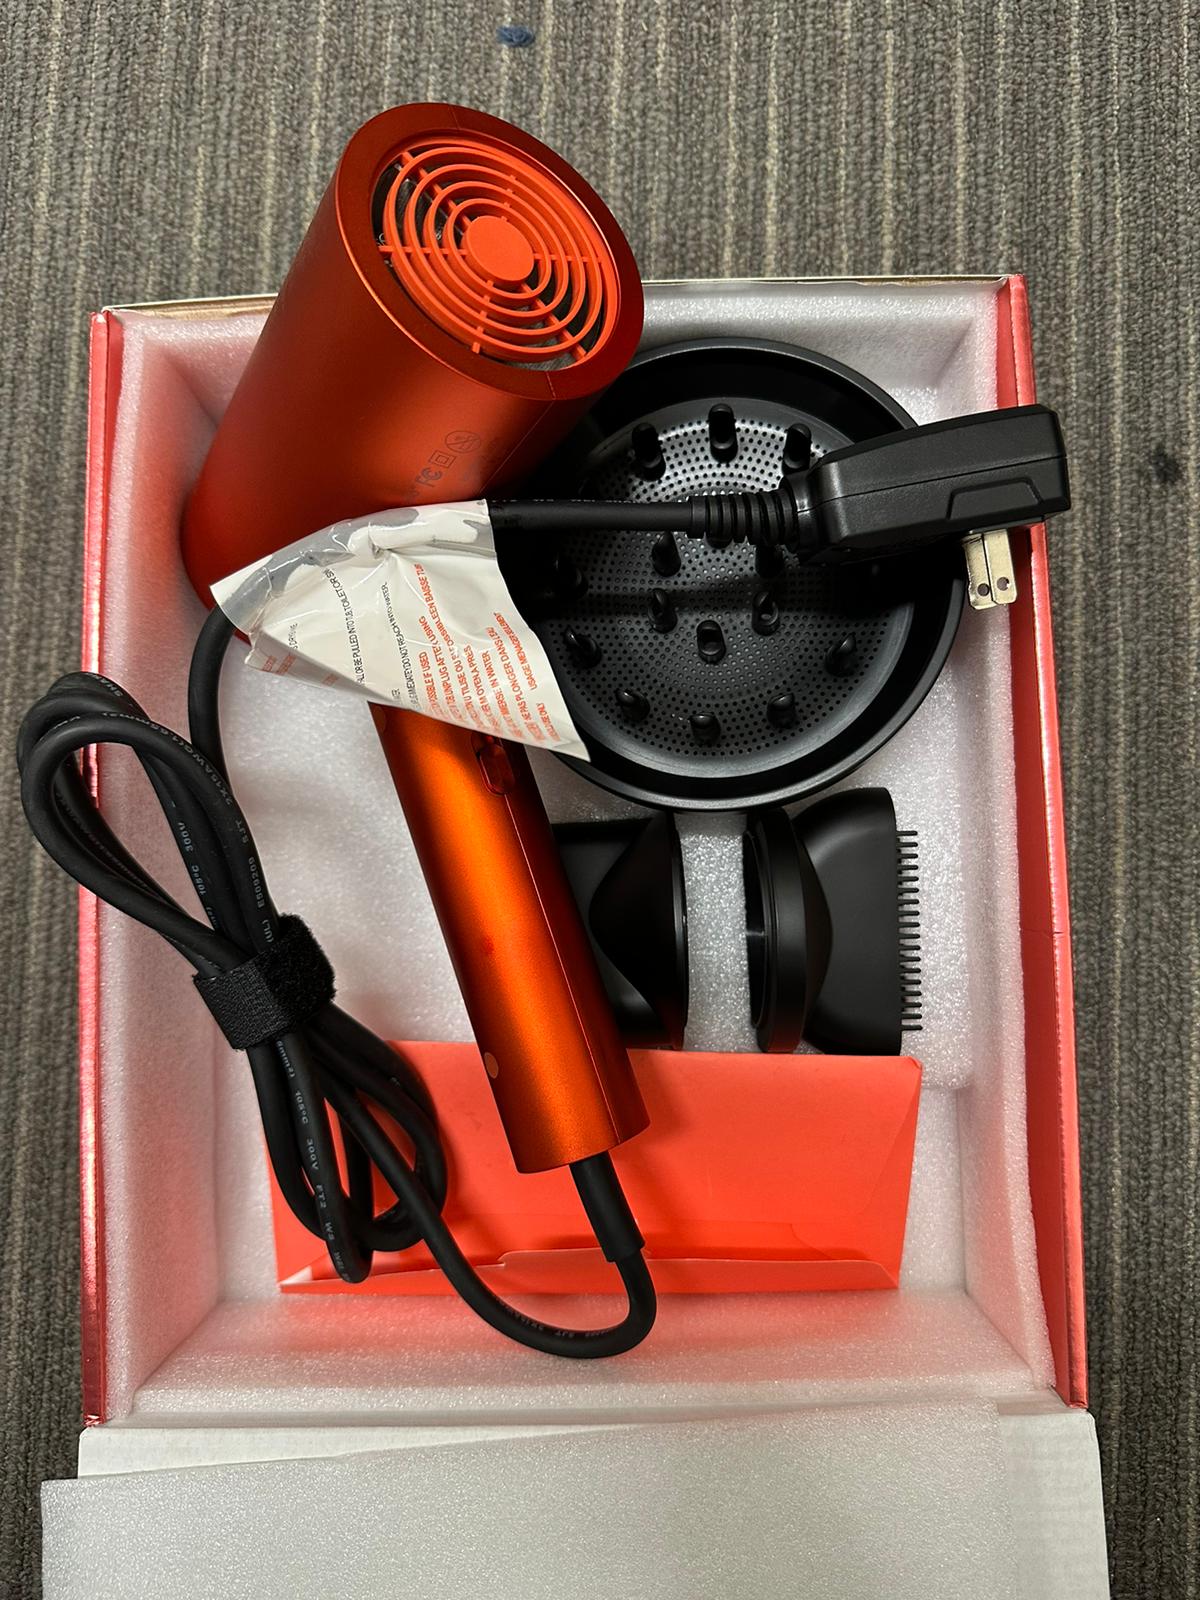 52608 - Superemo Hair Dryer 1800W Professional Fast Dry Hair Dryer (Coral Rose) USA